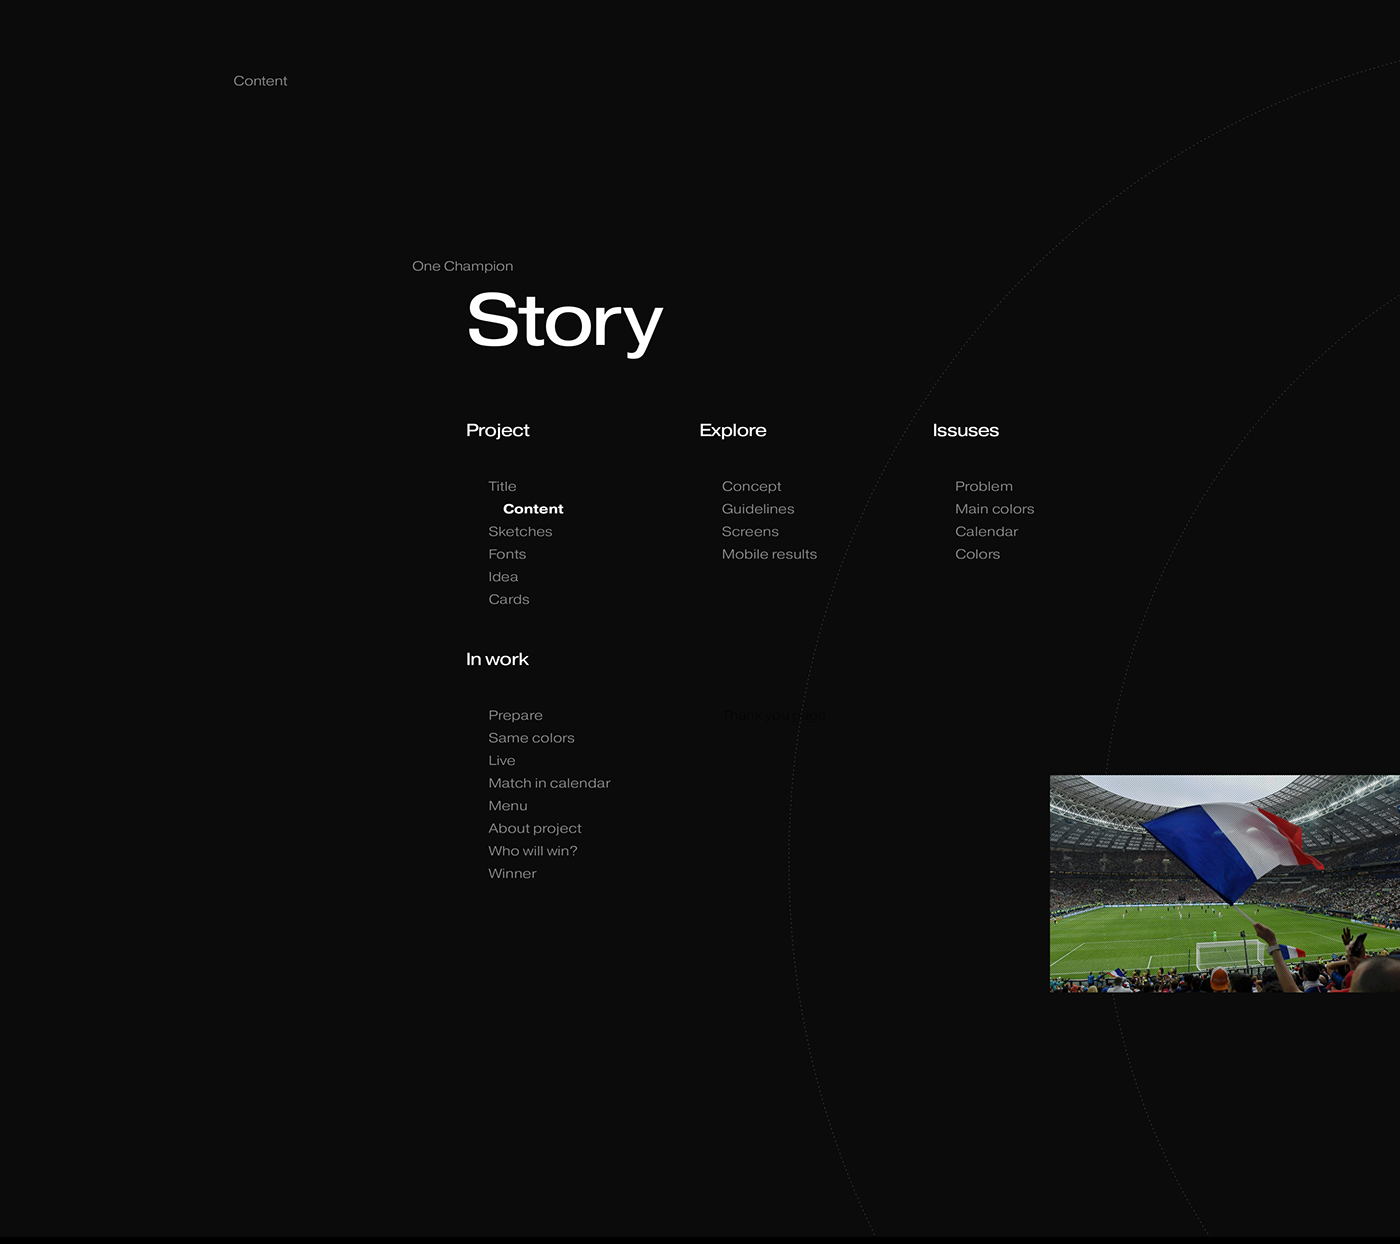 Web UI ux infographic football FIFA world cup Russia mundial sport